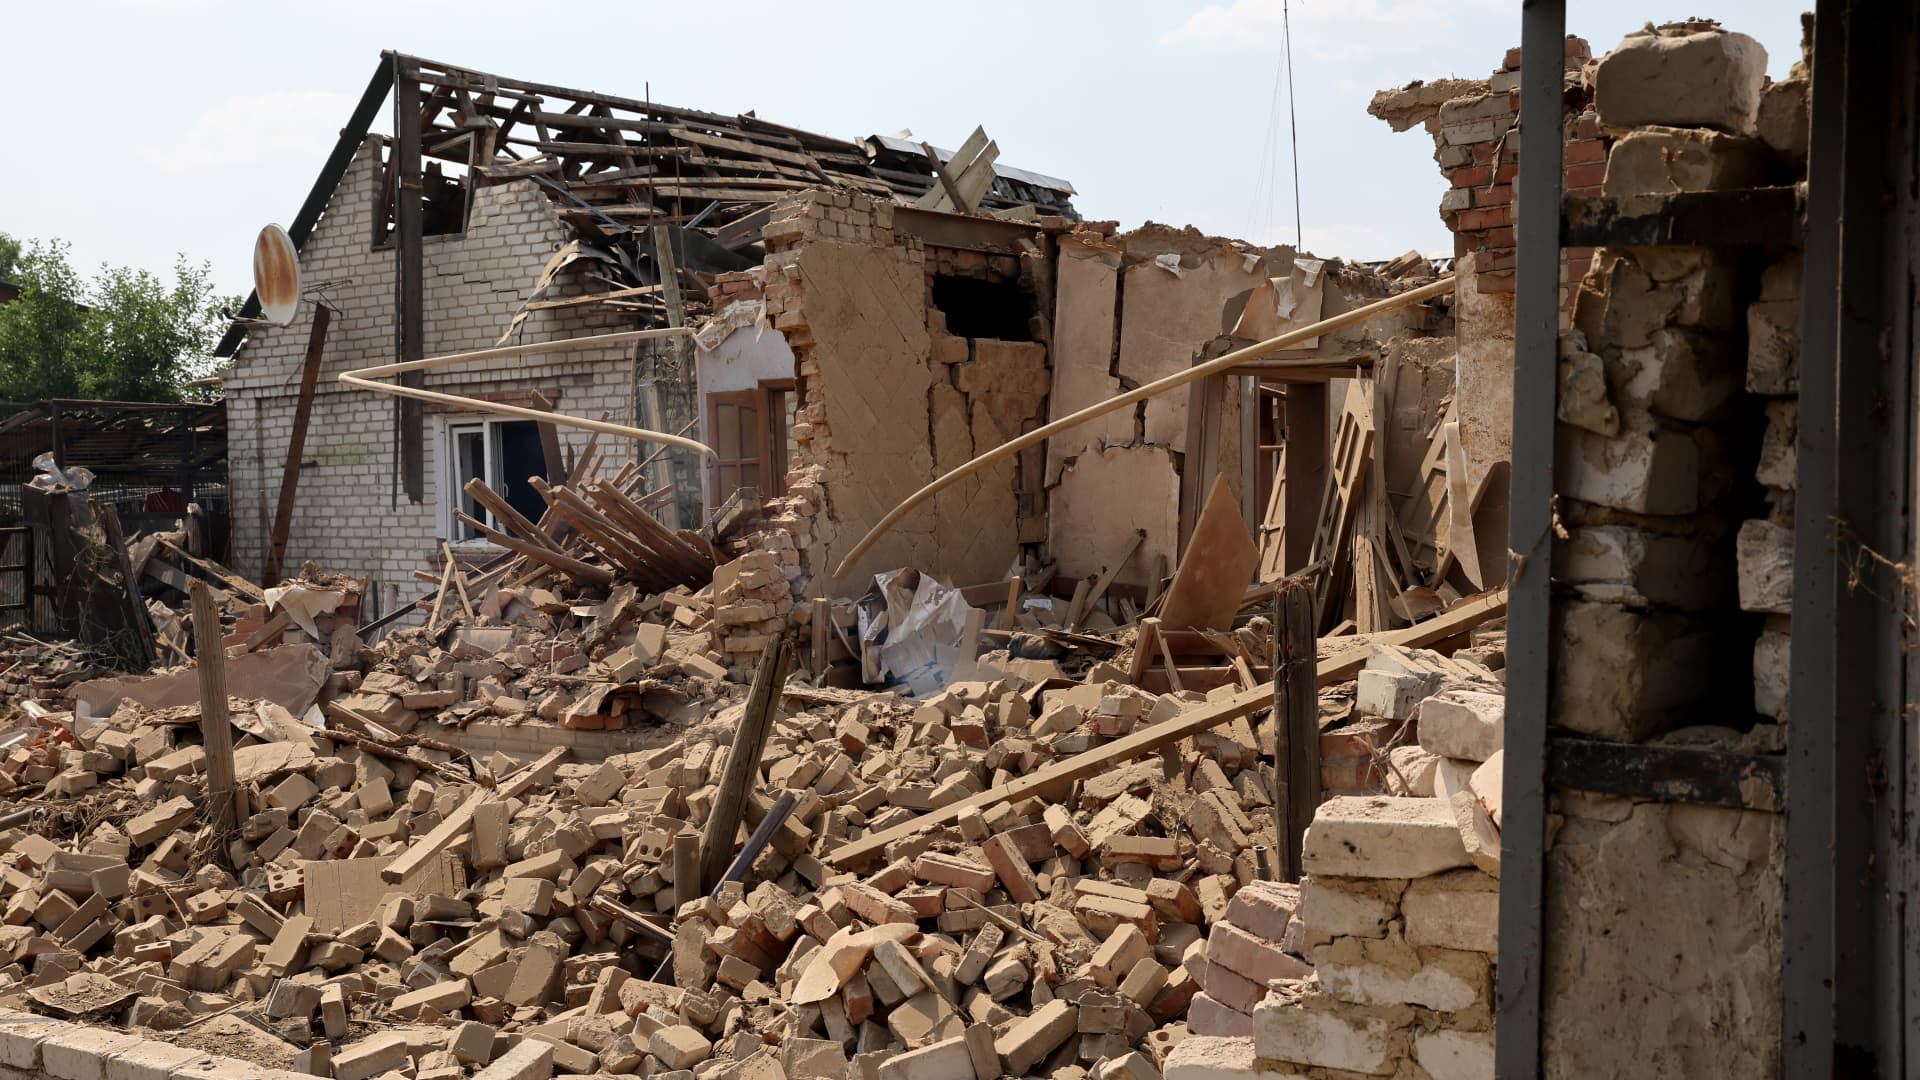 A home that was struck by a missile, on July 3, 2022, in Sloviansk, Ukraine.